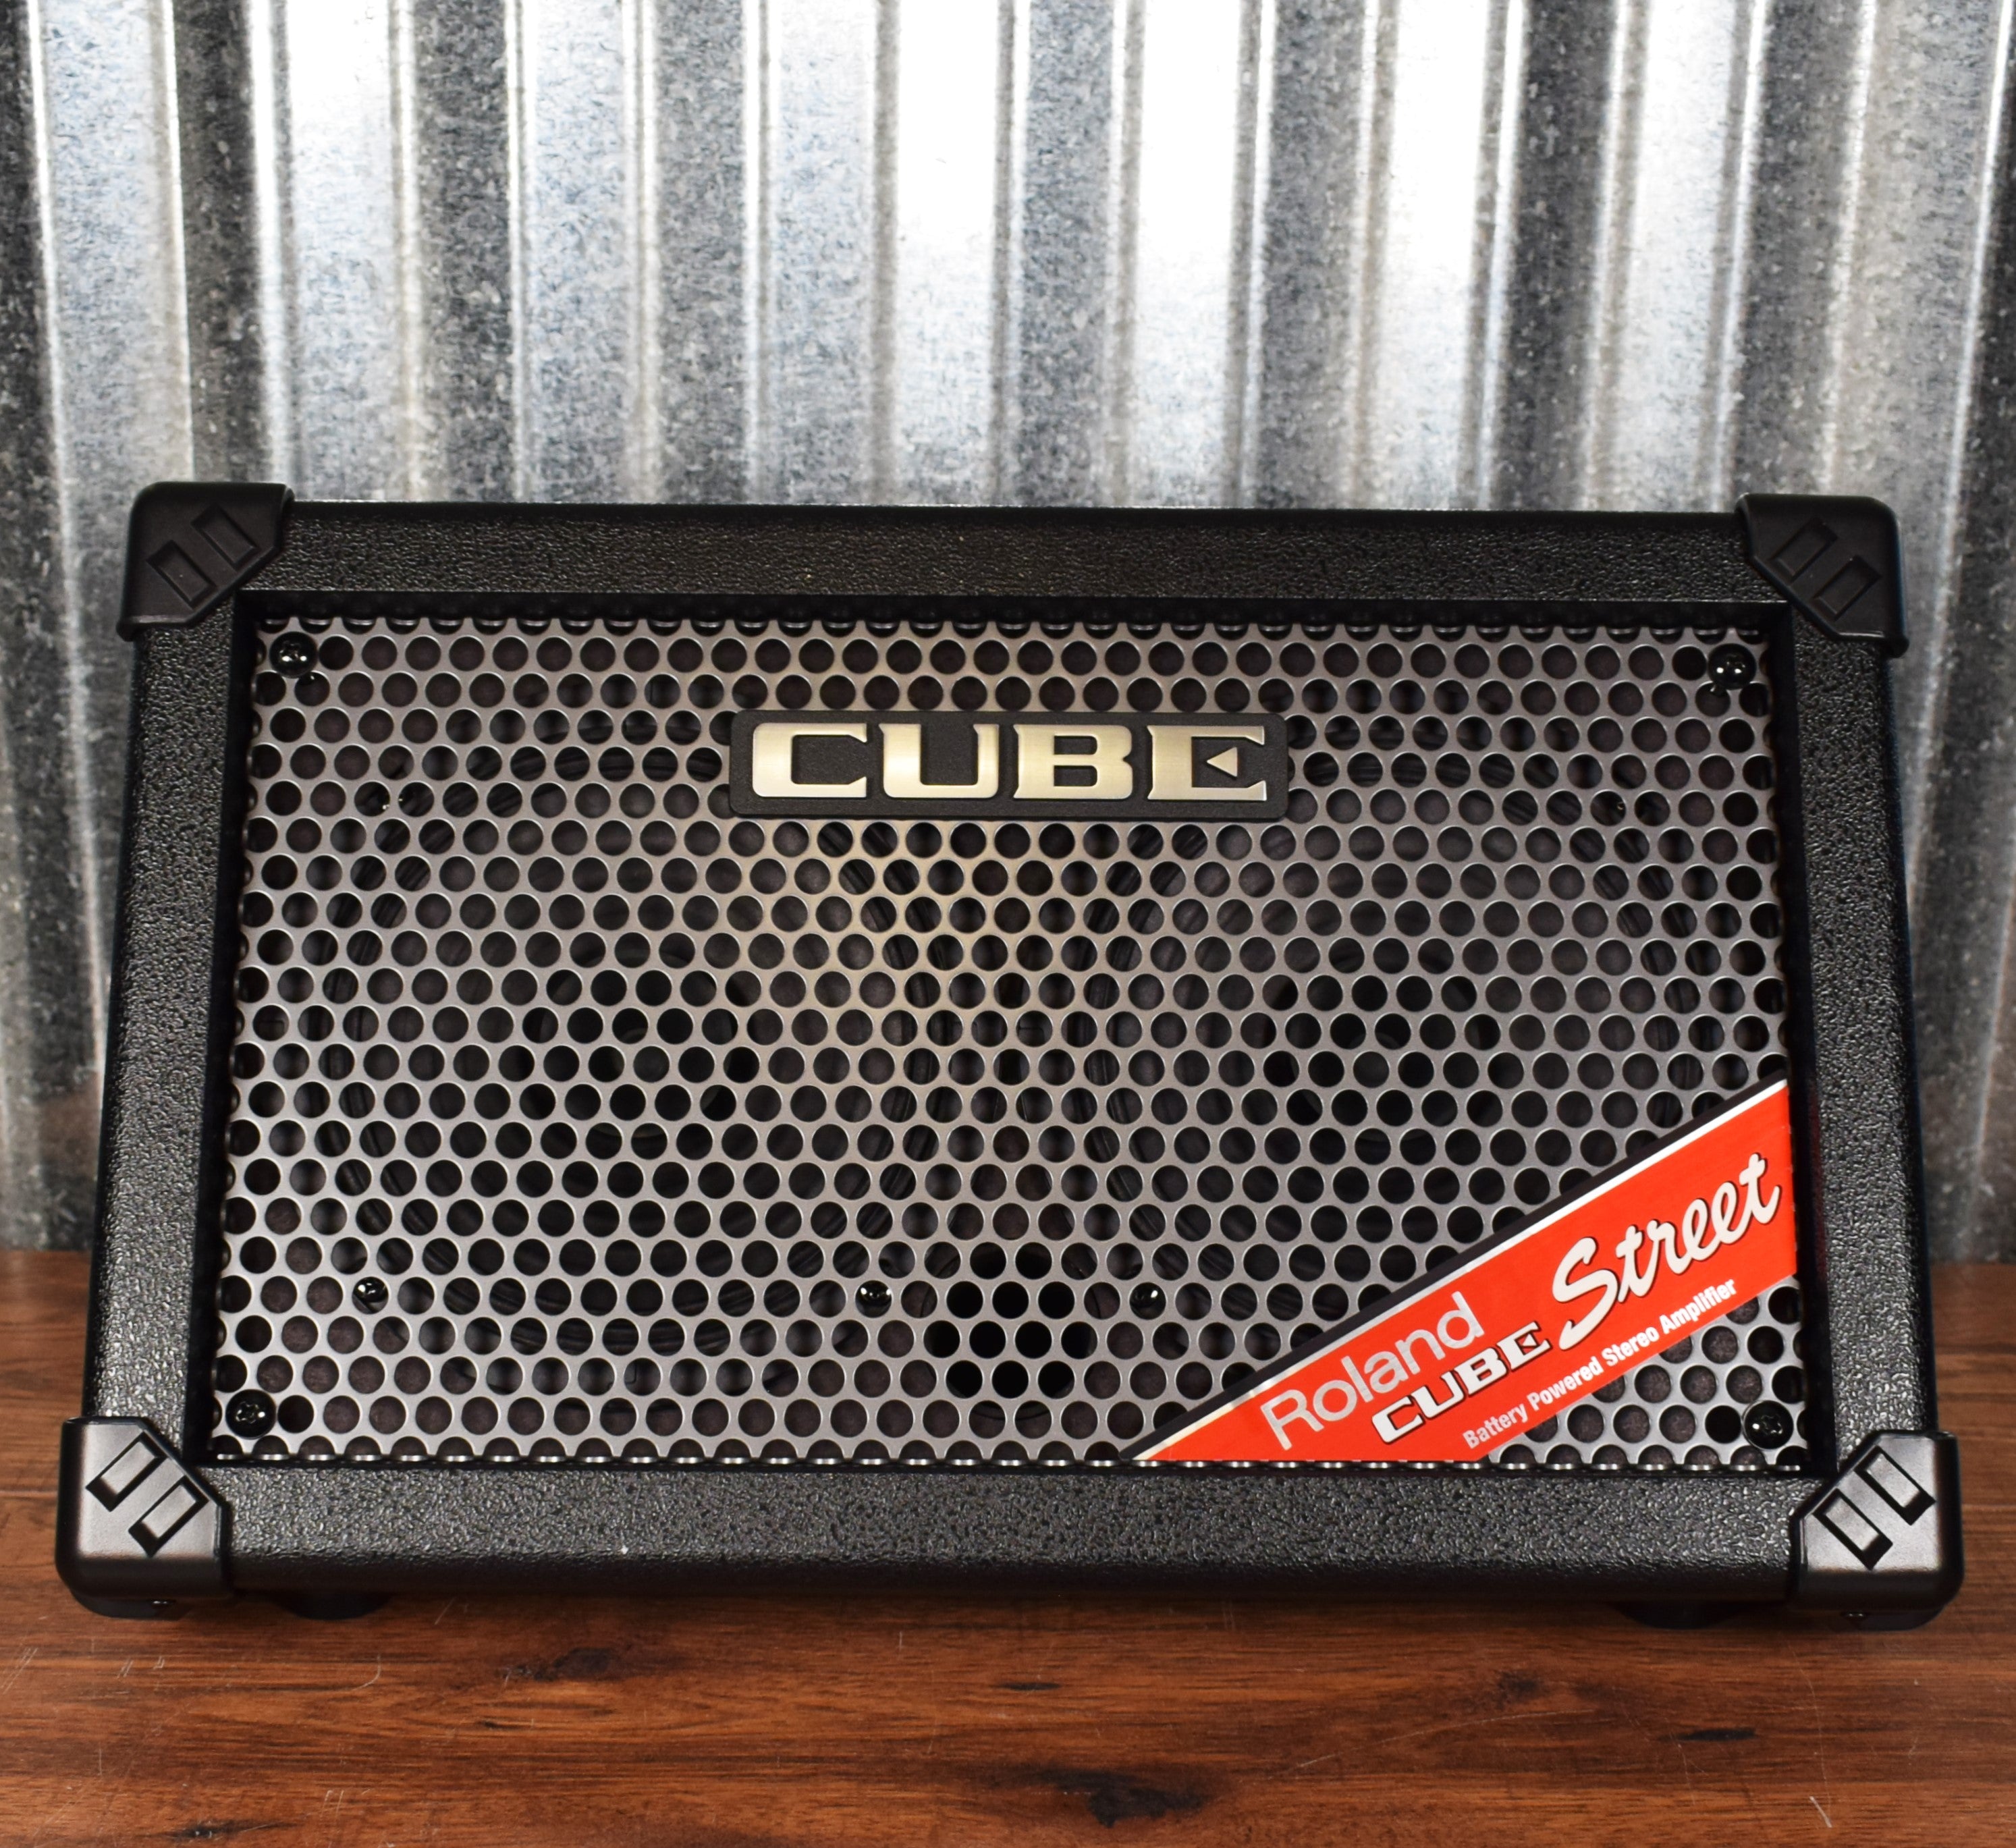 Vocal　CUBE　Battery　Bla　Roland　Guitar　Specialty　Traders　Combo　STREET　PA　–　Powered　Amplifier